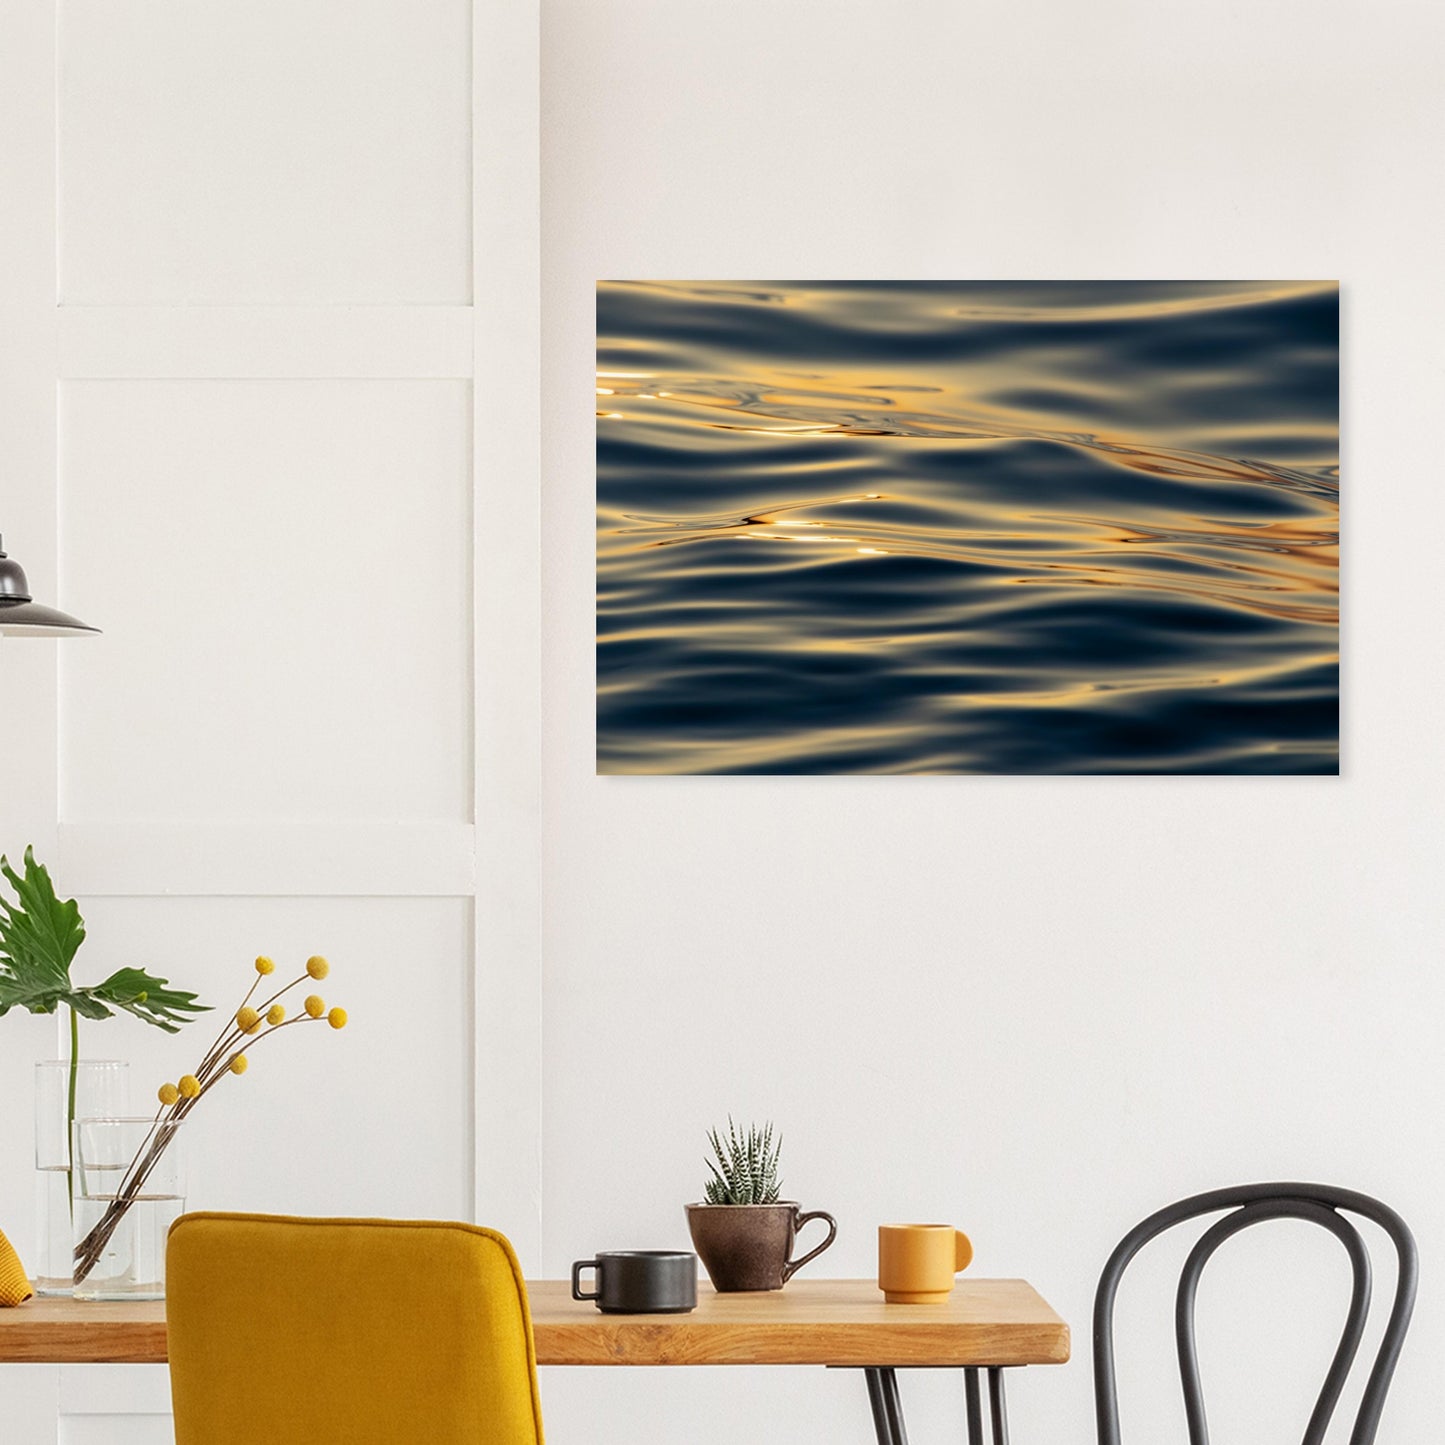 Glittering sea waves in the sunset - premium poster